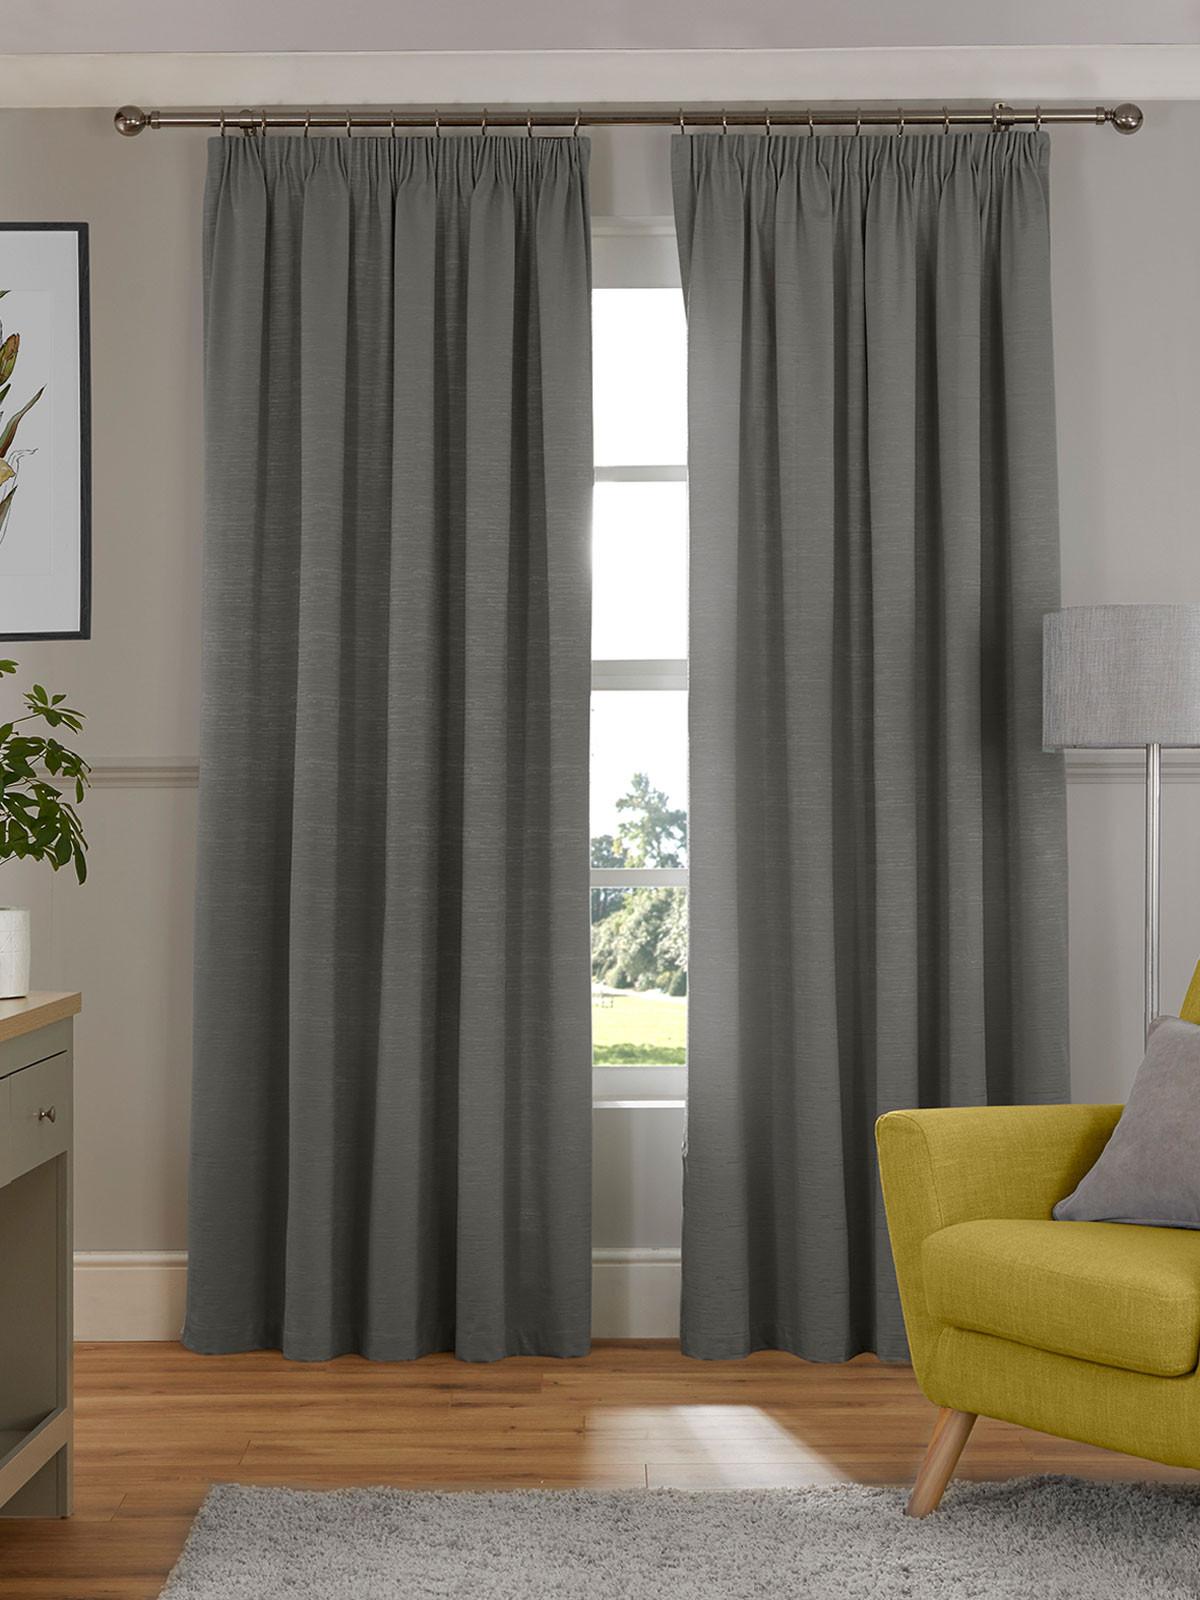 Grey Curtains Bedroom Blackout